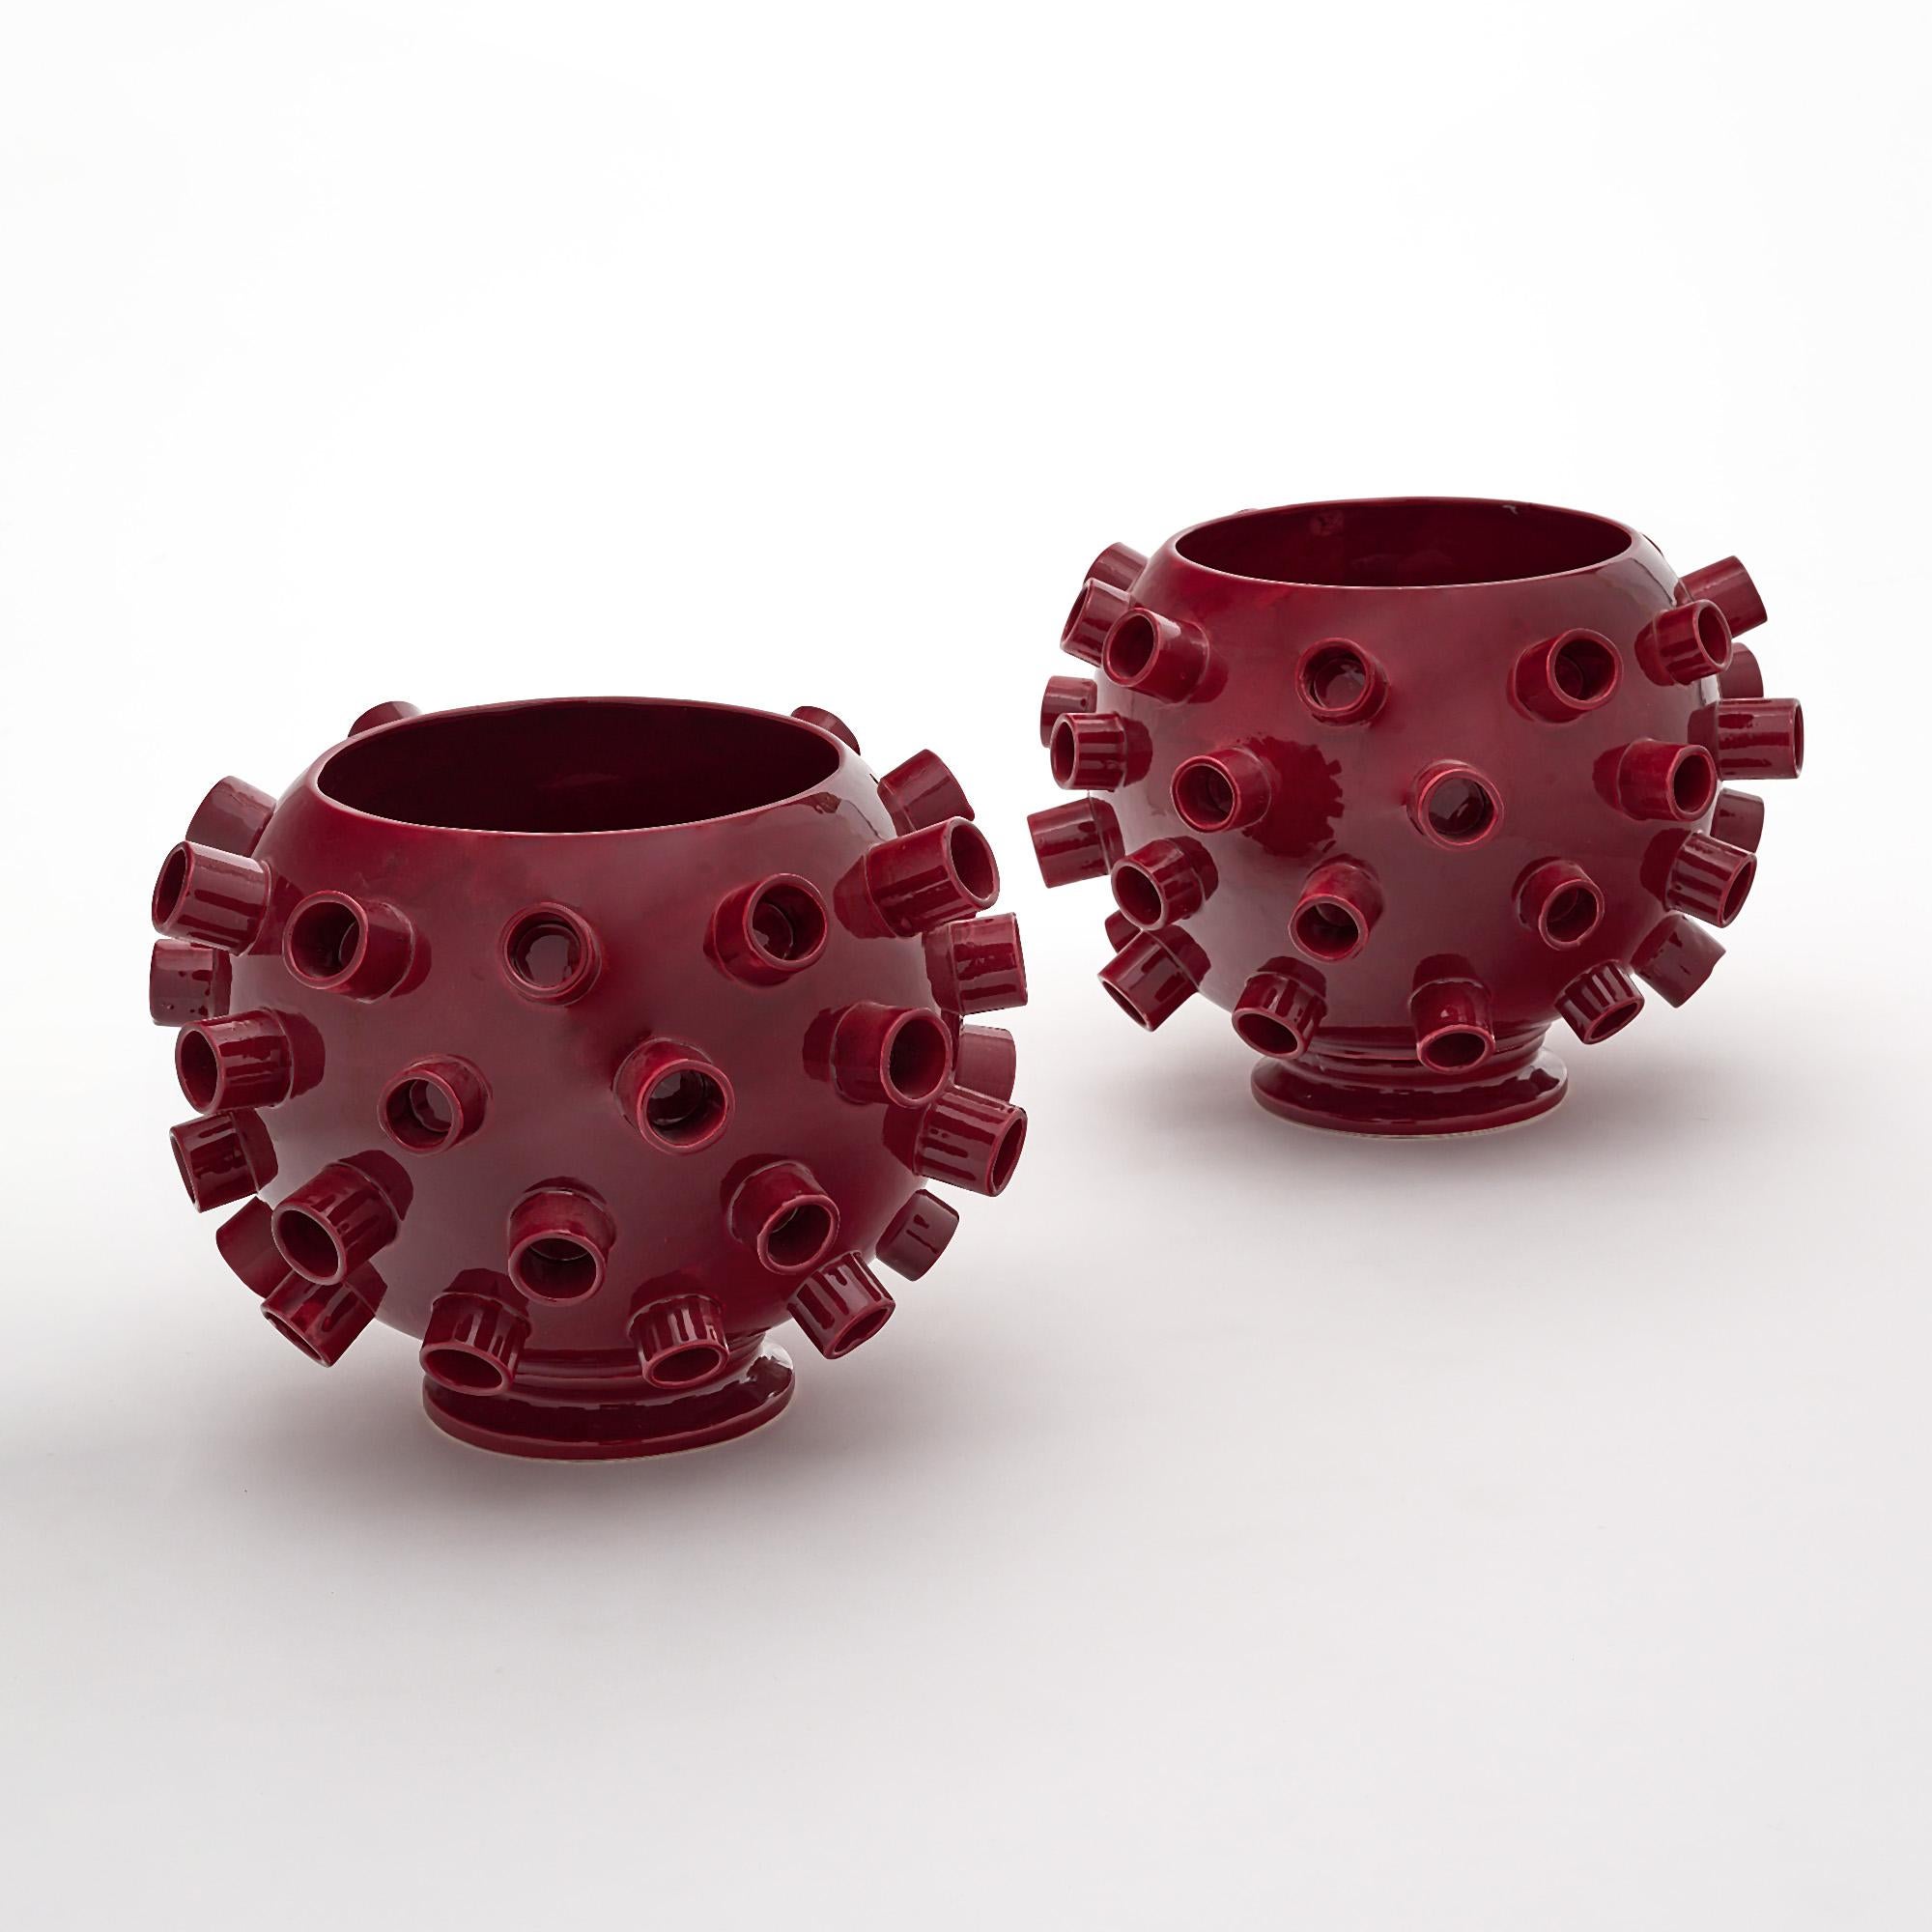 Pair of vases, in the Brutalist style, from Verona, Italy. This pair is made of ceramic with a burgundy glossy glaze. They are signed MC for artist M. Costa.